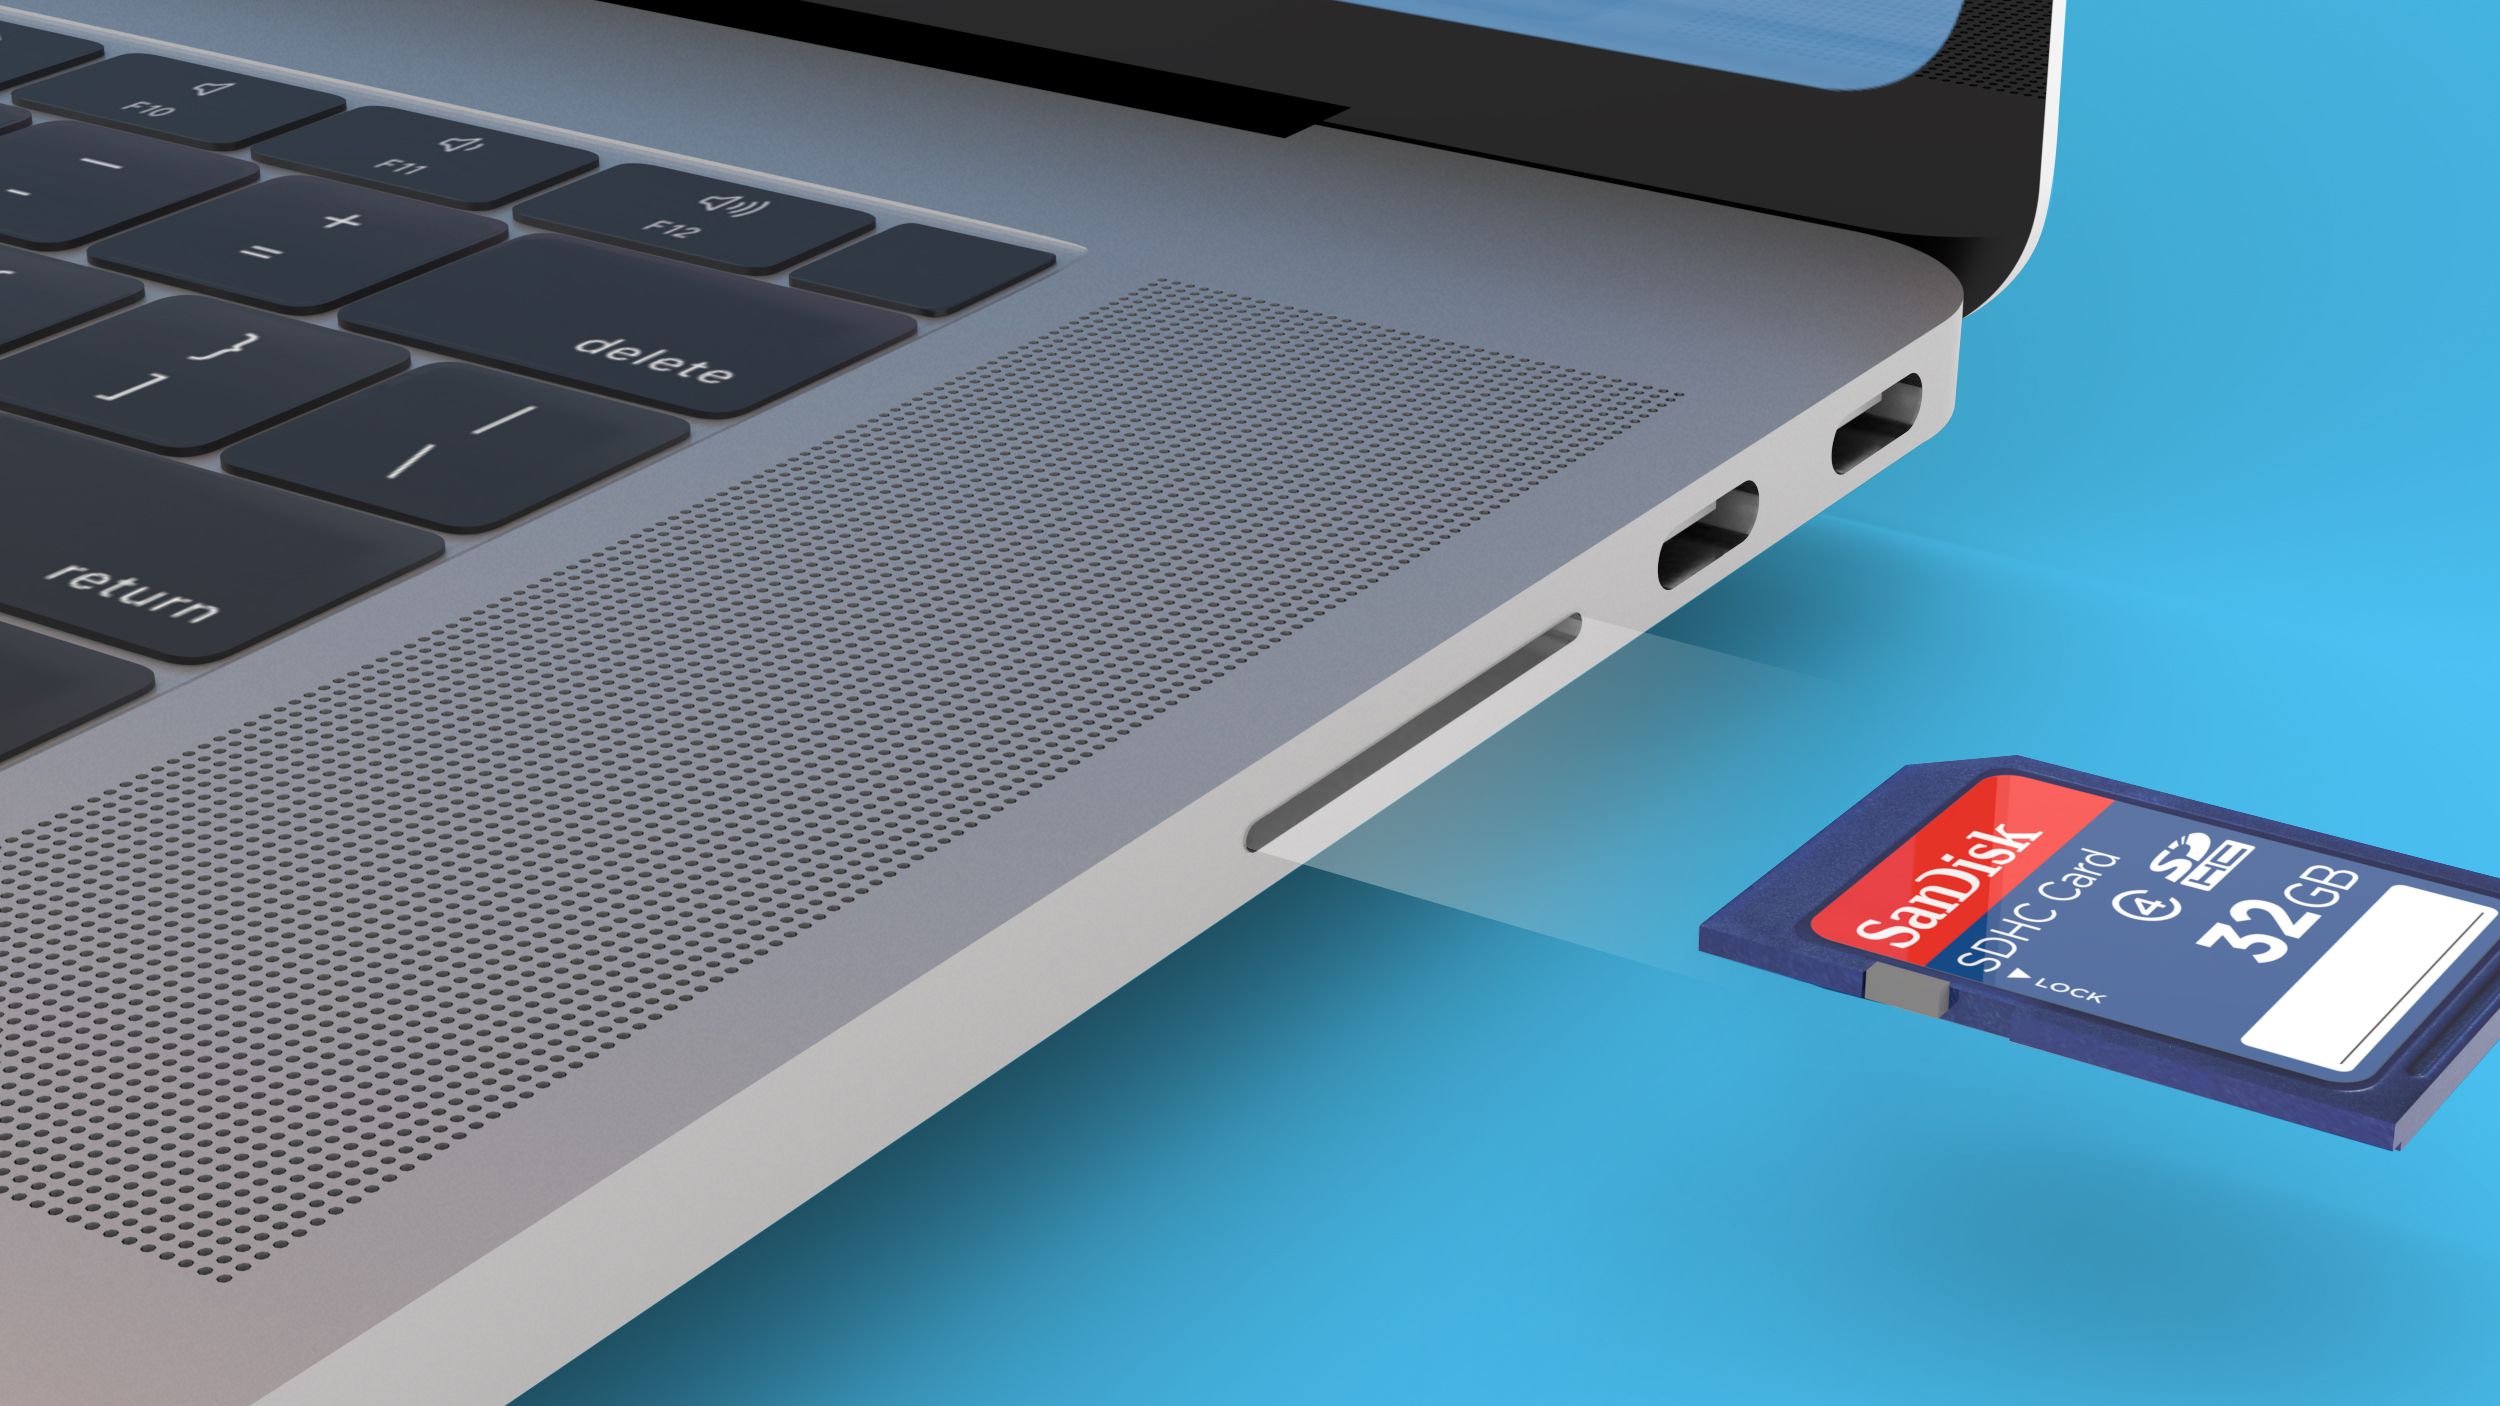 Kuo: New Pro With HDMI Port and SD Card Reader to Launch Later This - MacRumors